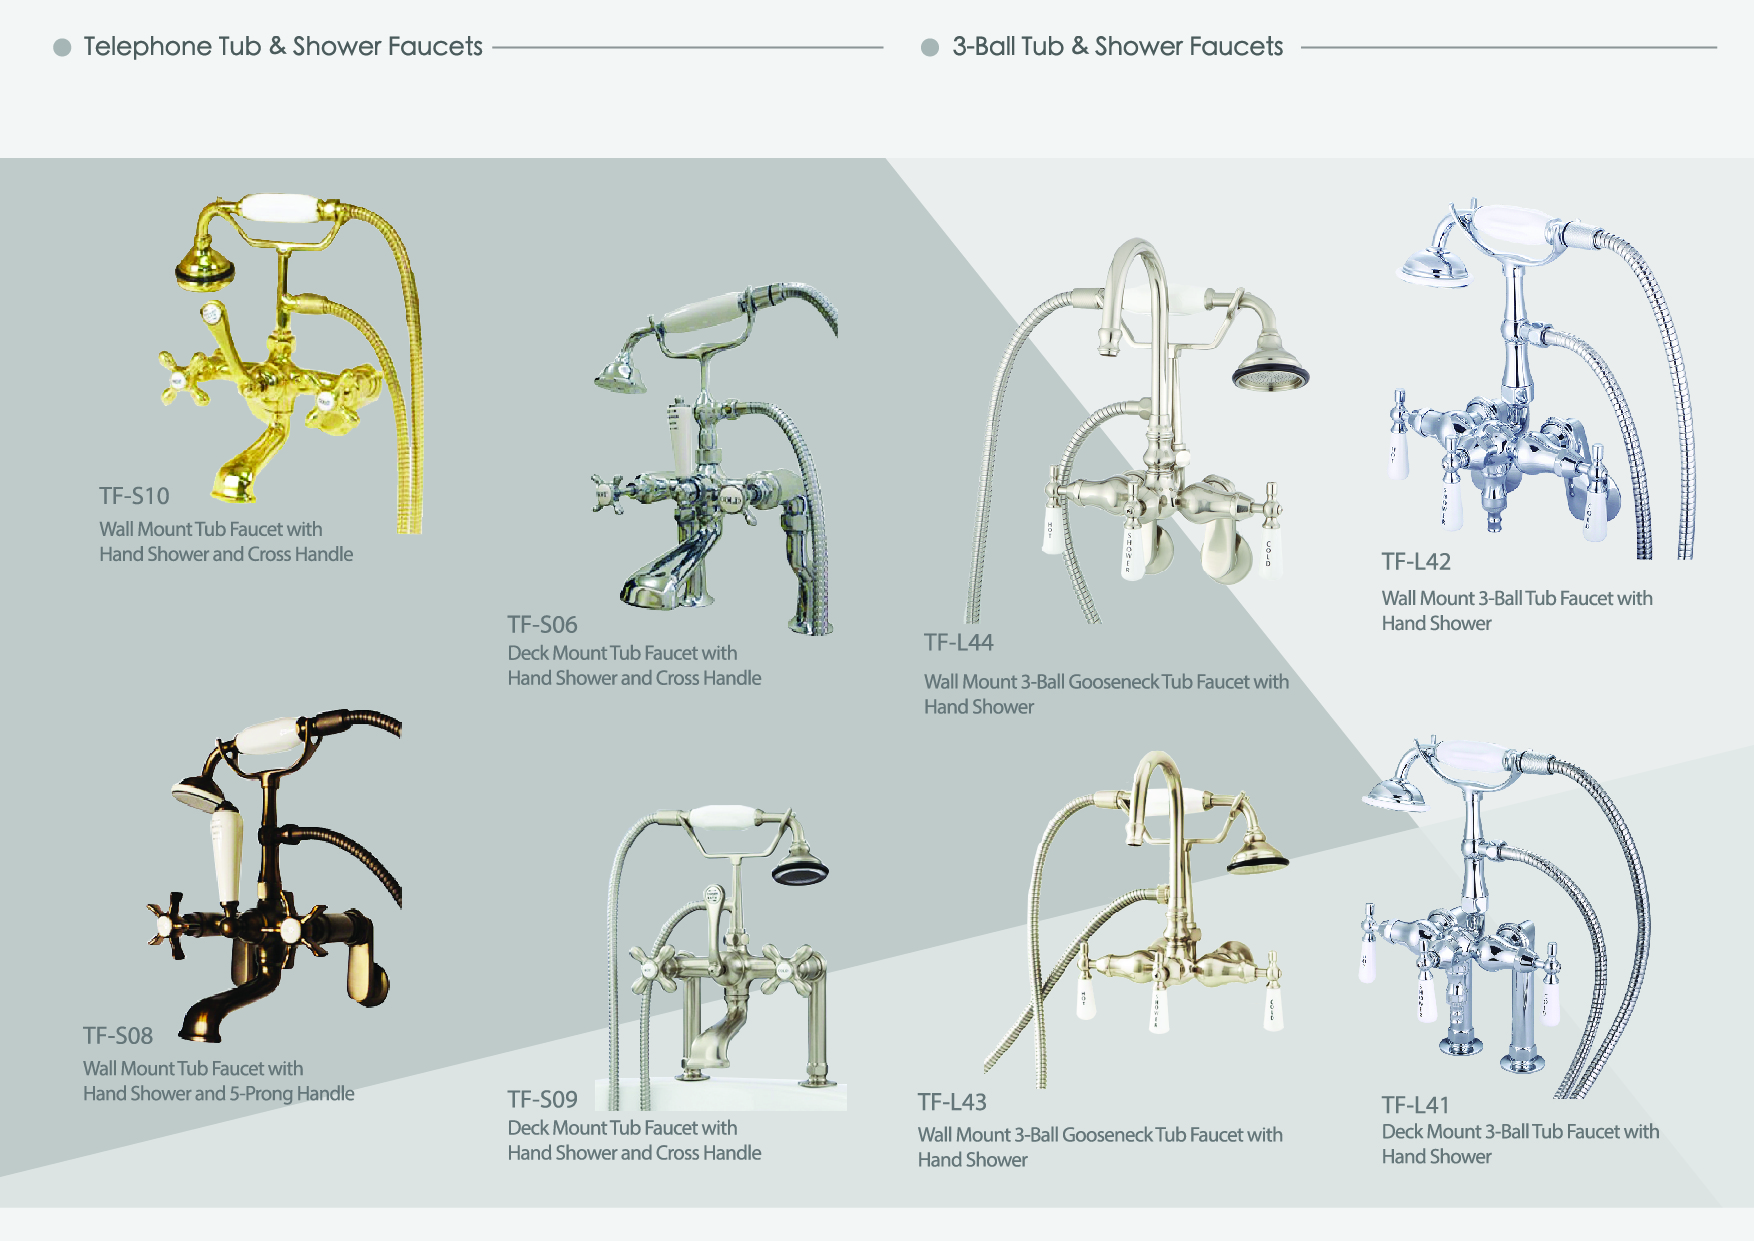 Traditional Tub & Shower Faucets